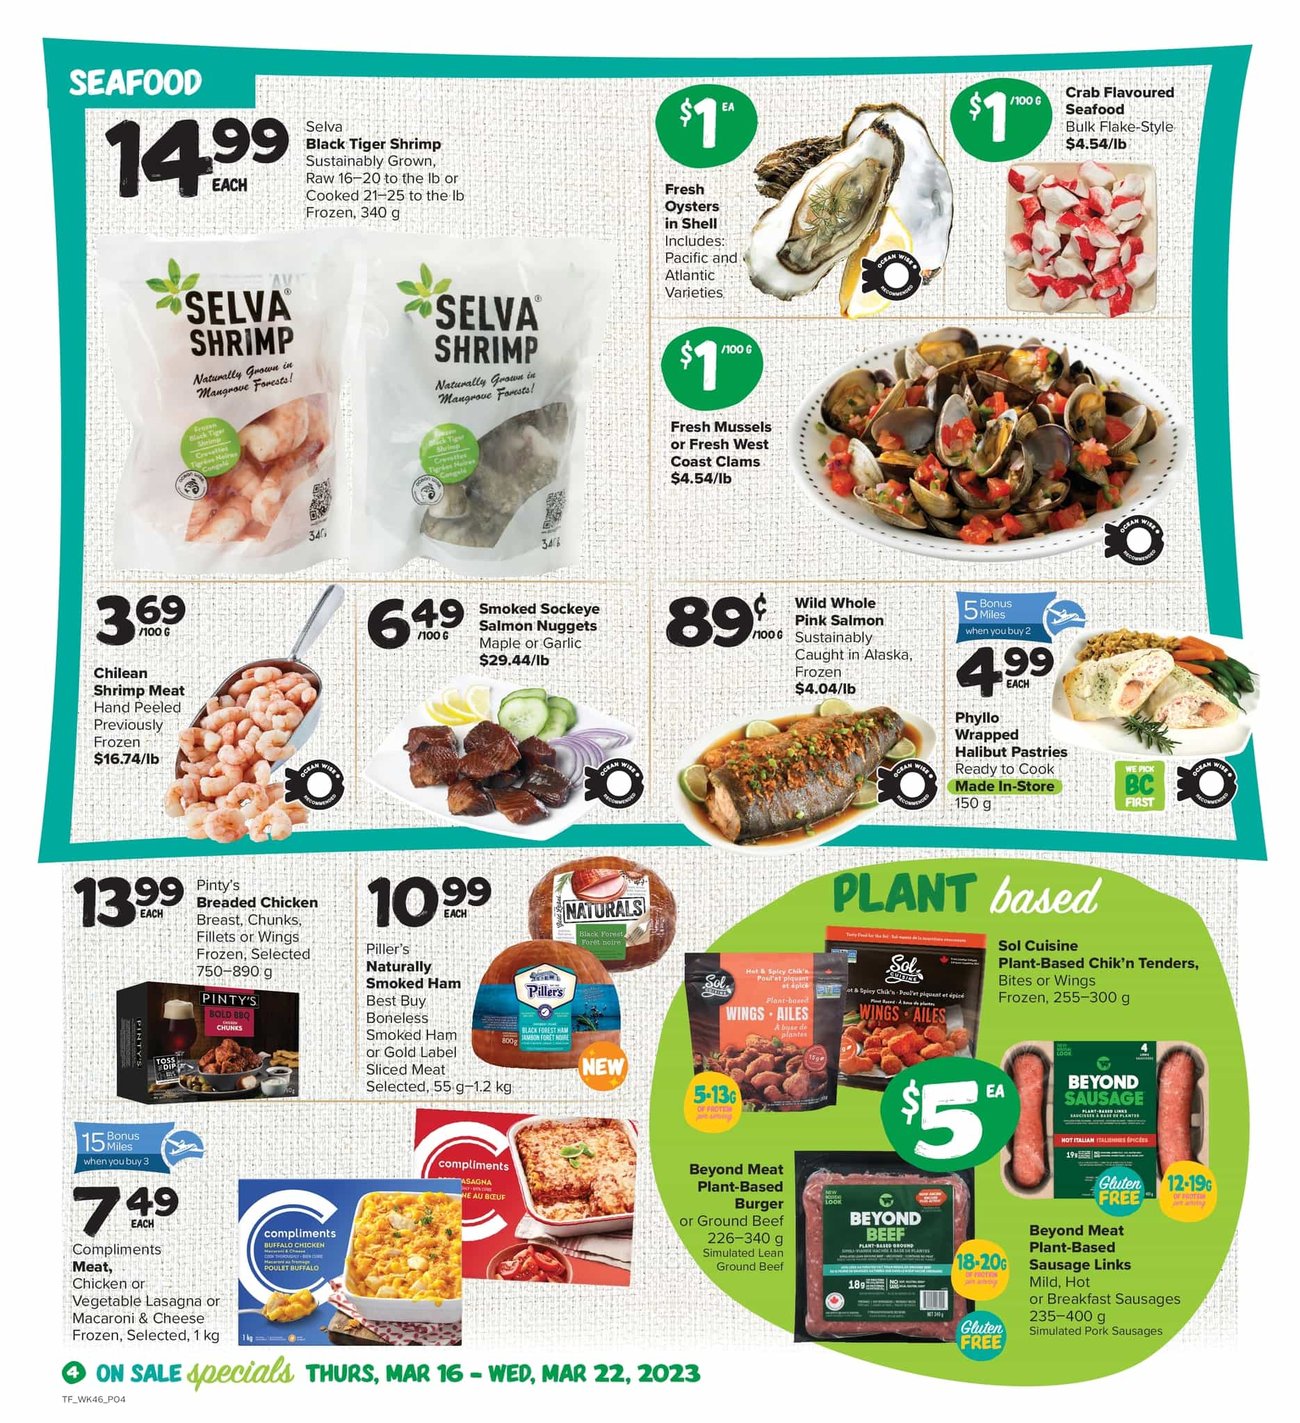 Thrifty Foods - Weekly Flyer Specials - Page 4